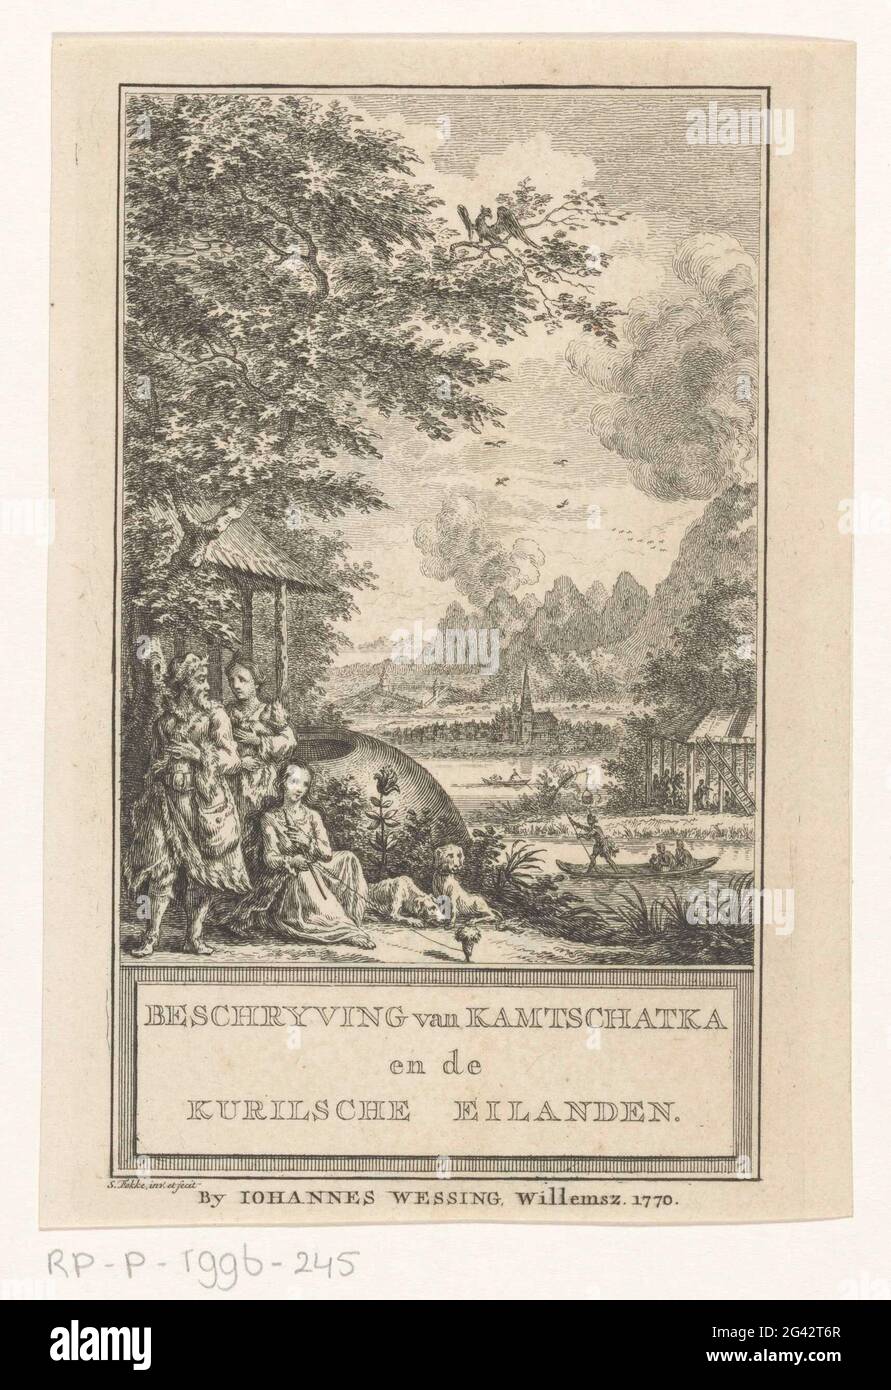 Allegory on Kamtsjatka and the Kurilen; DAMYING OF KAMSSCHATKA and the Kurilsche Islands; Title page for: Stepan Krasheninnikov, Nature expert and NatuurDelly Differve from Kamtschatka and the Kurilsche Islands, 1770. A man, a woman with baby, a young woman with toll and a dog are standing in front of a home. In the background a boat on the water and a church tower in a mountain landscape. Stock Photo